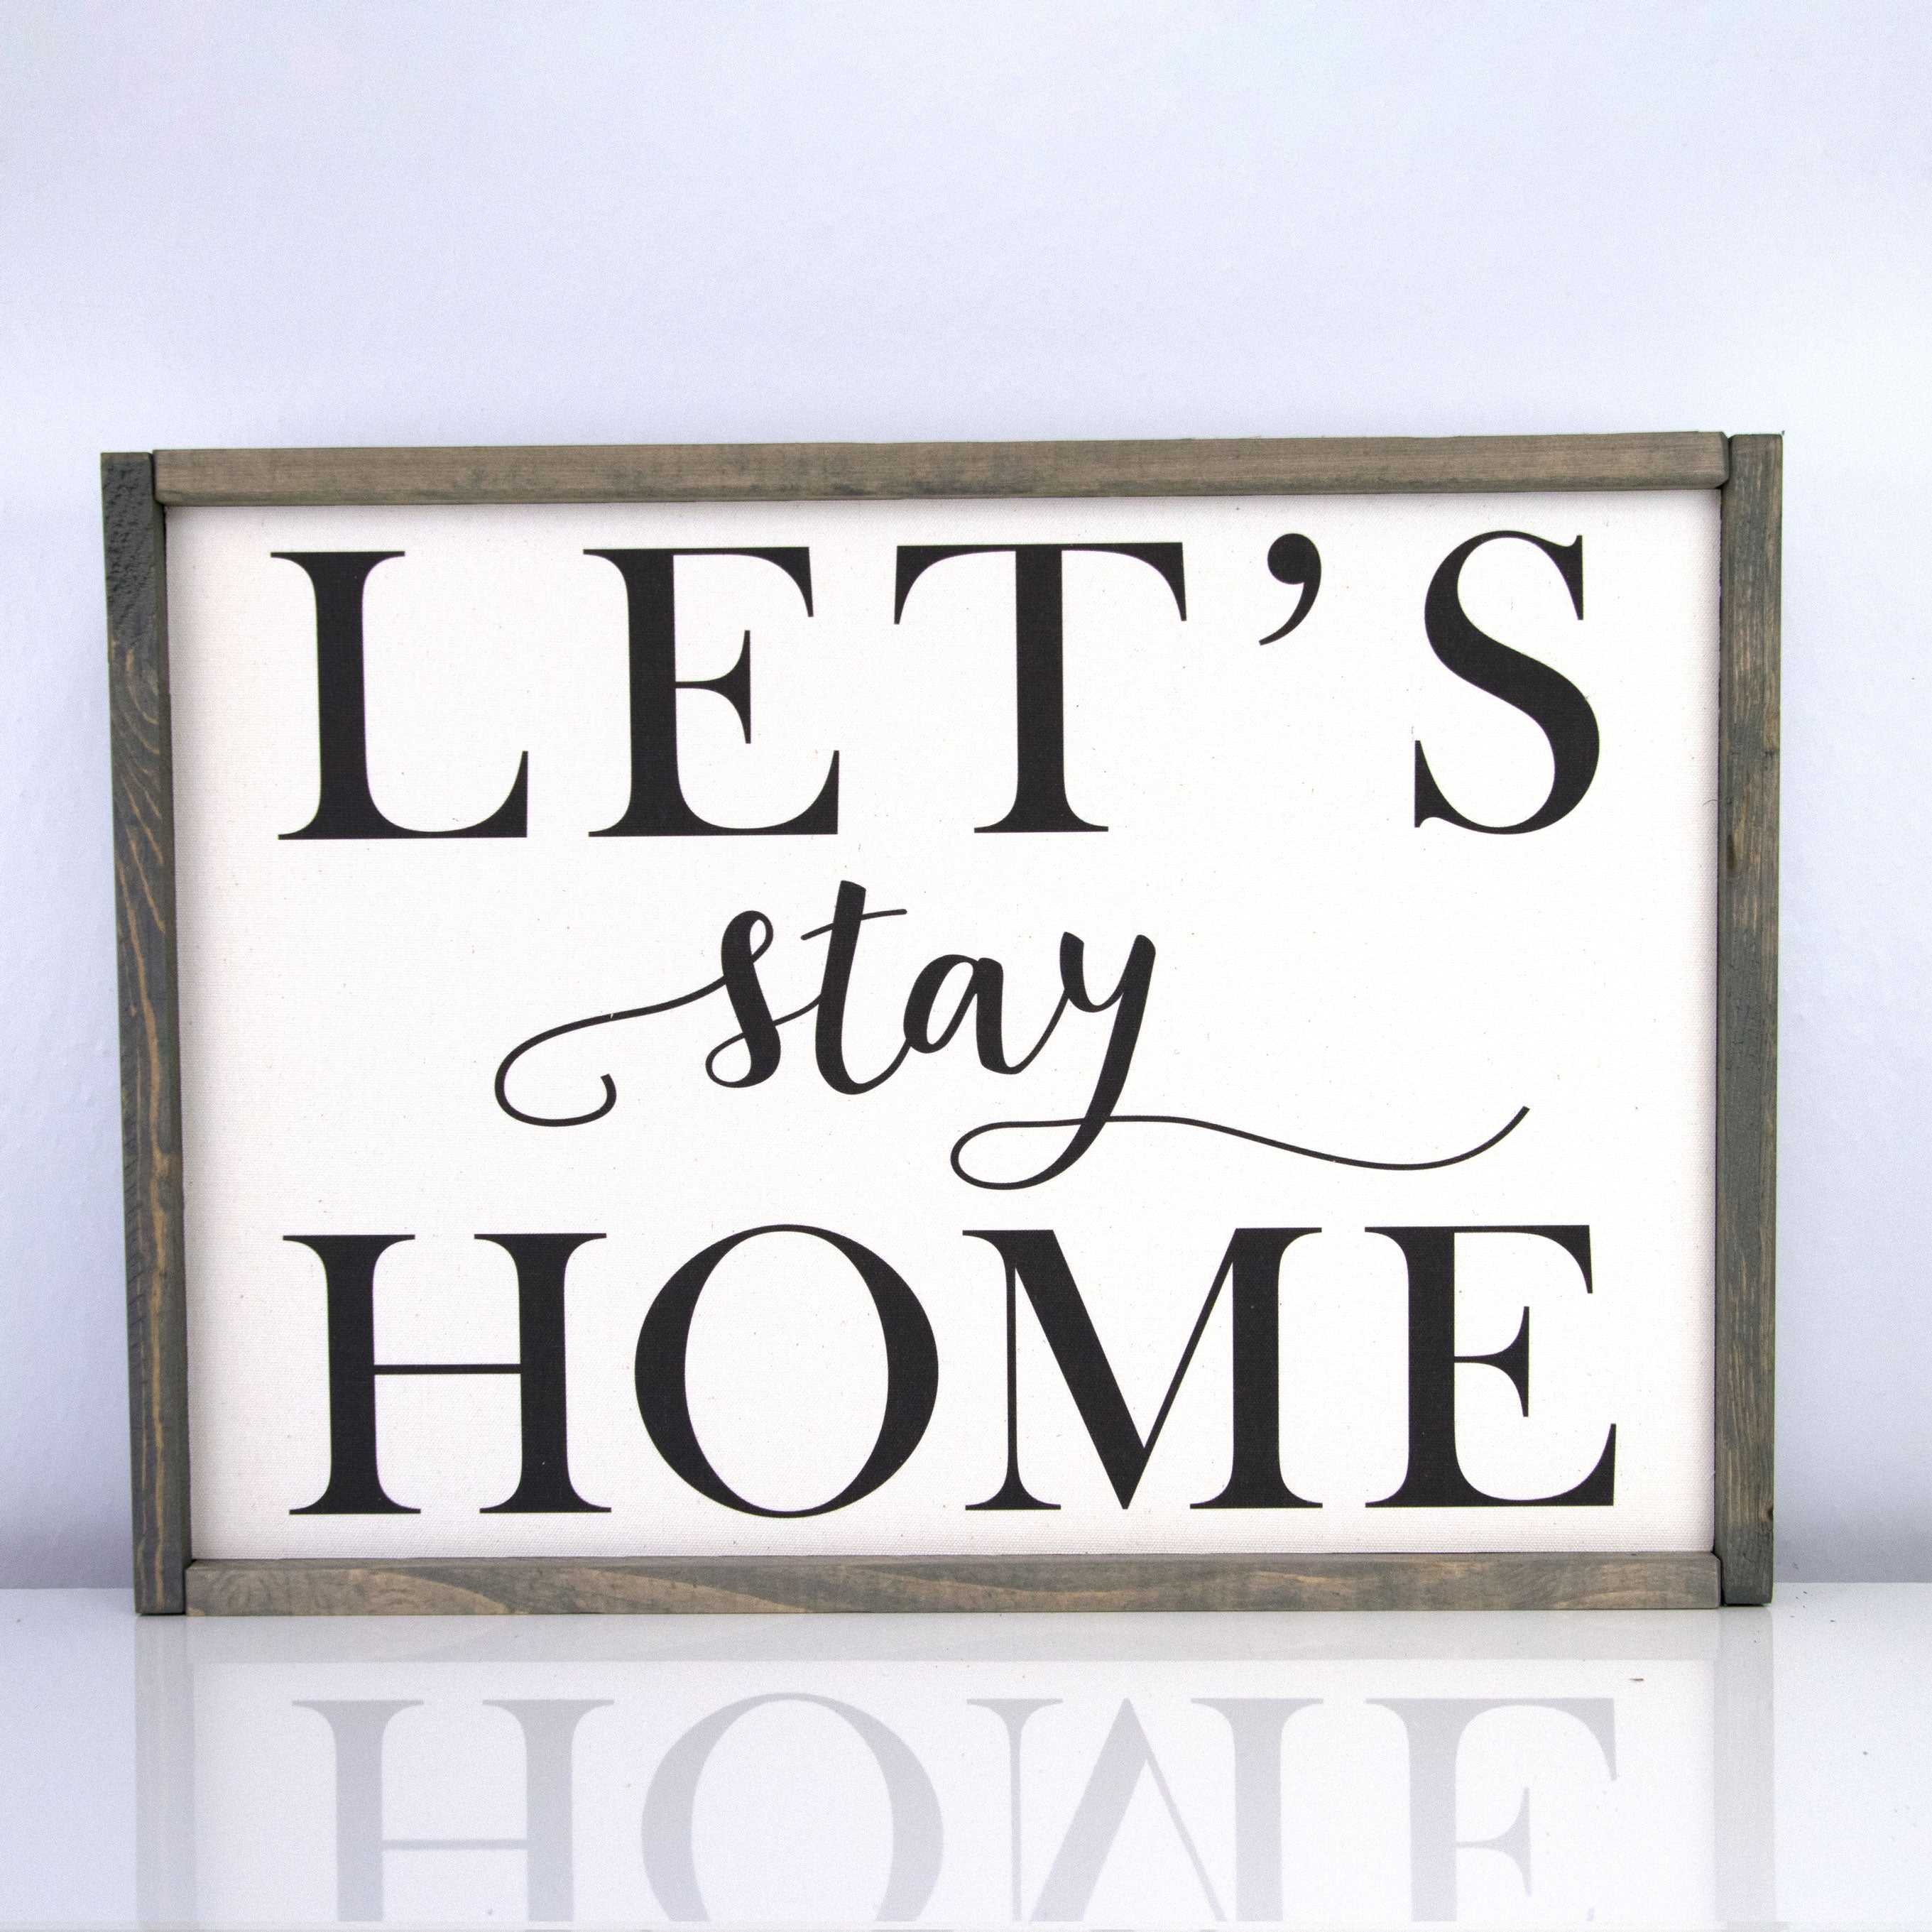 Let's Stay Home | 14 x 20 Vintage